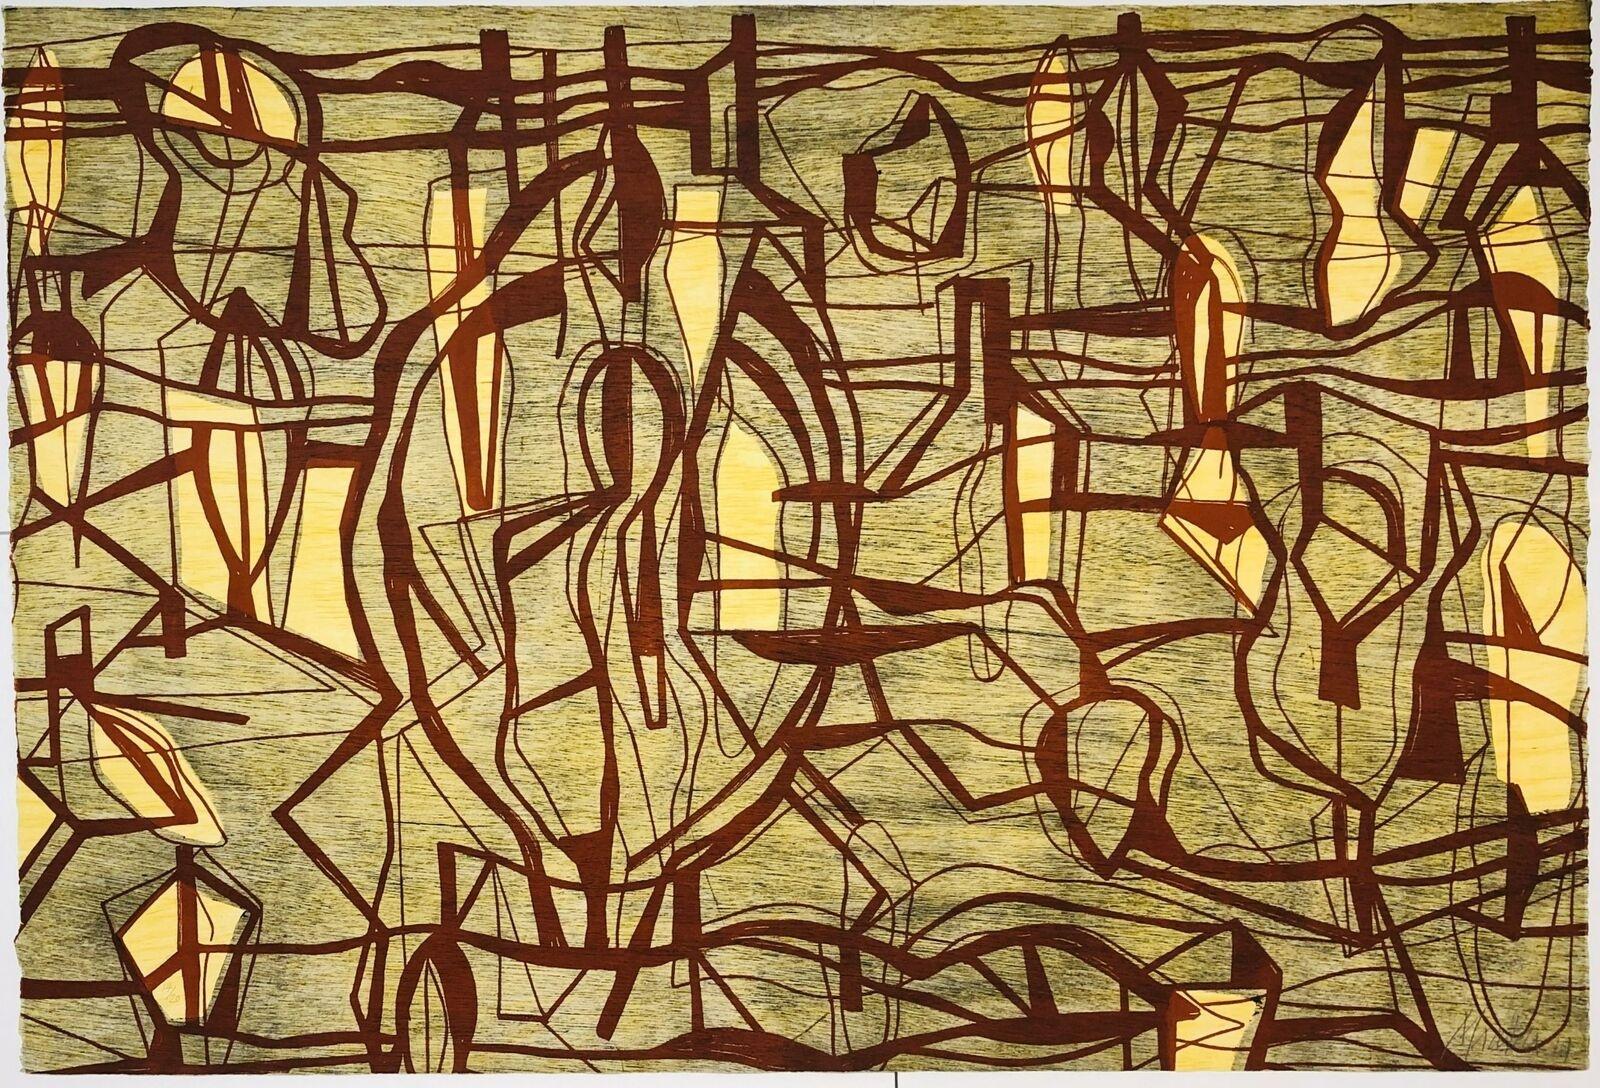 Gabriel Macotela (Mexico, 1954)
'Untitled', 2020
woodcut on paper Guarro Super Alpha 250g.
30 x 44.1 in. (76 x 112 cm.)
Edition of 20
ID: MAG-103
Unframed